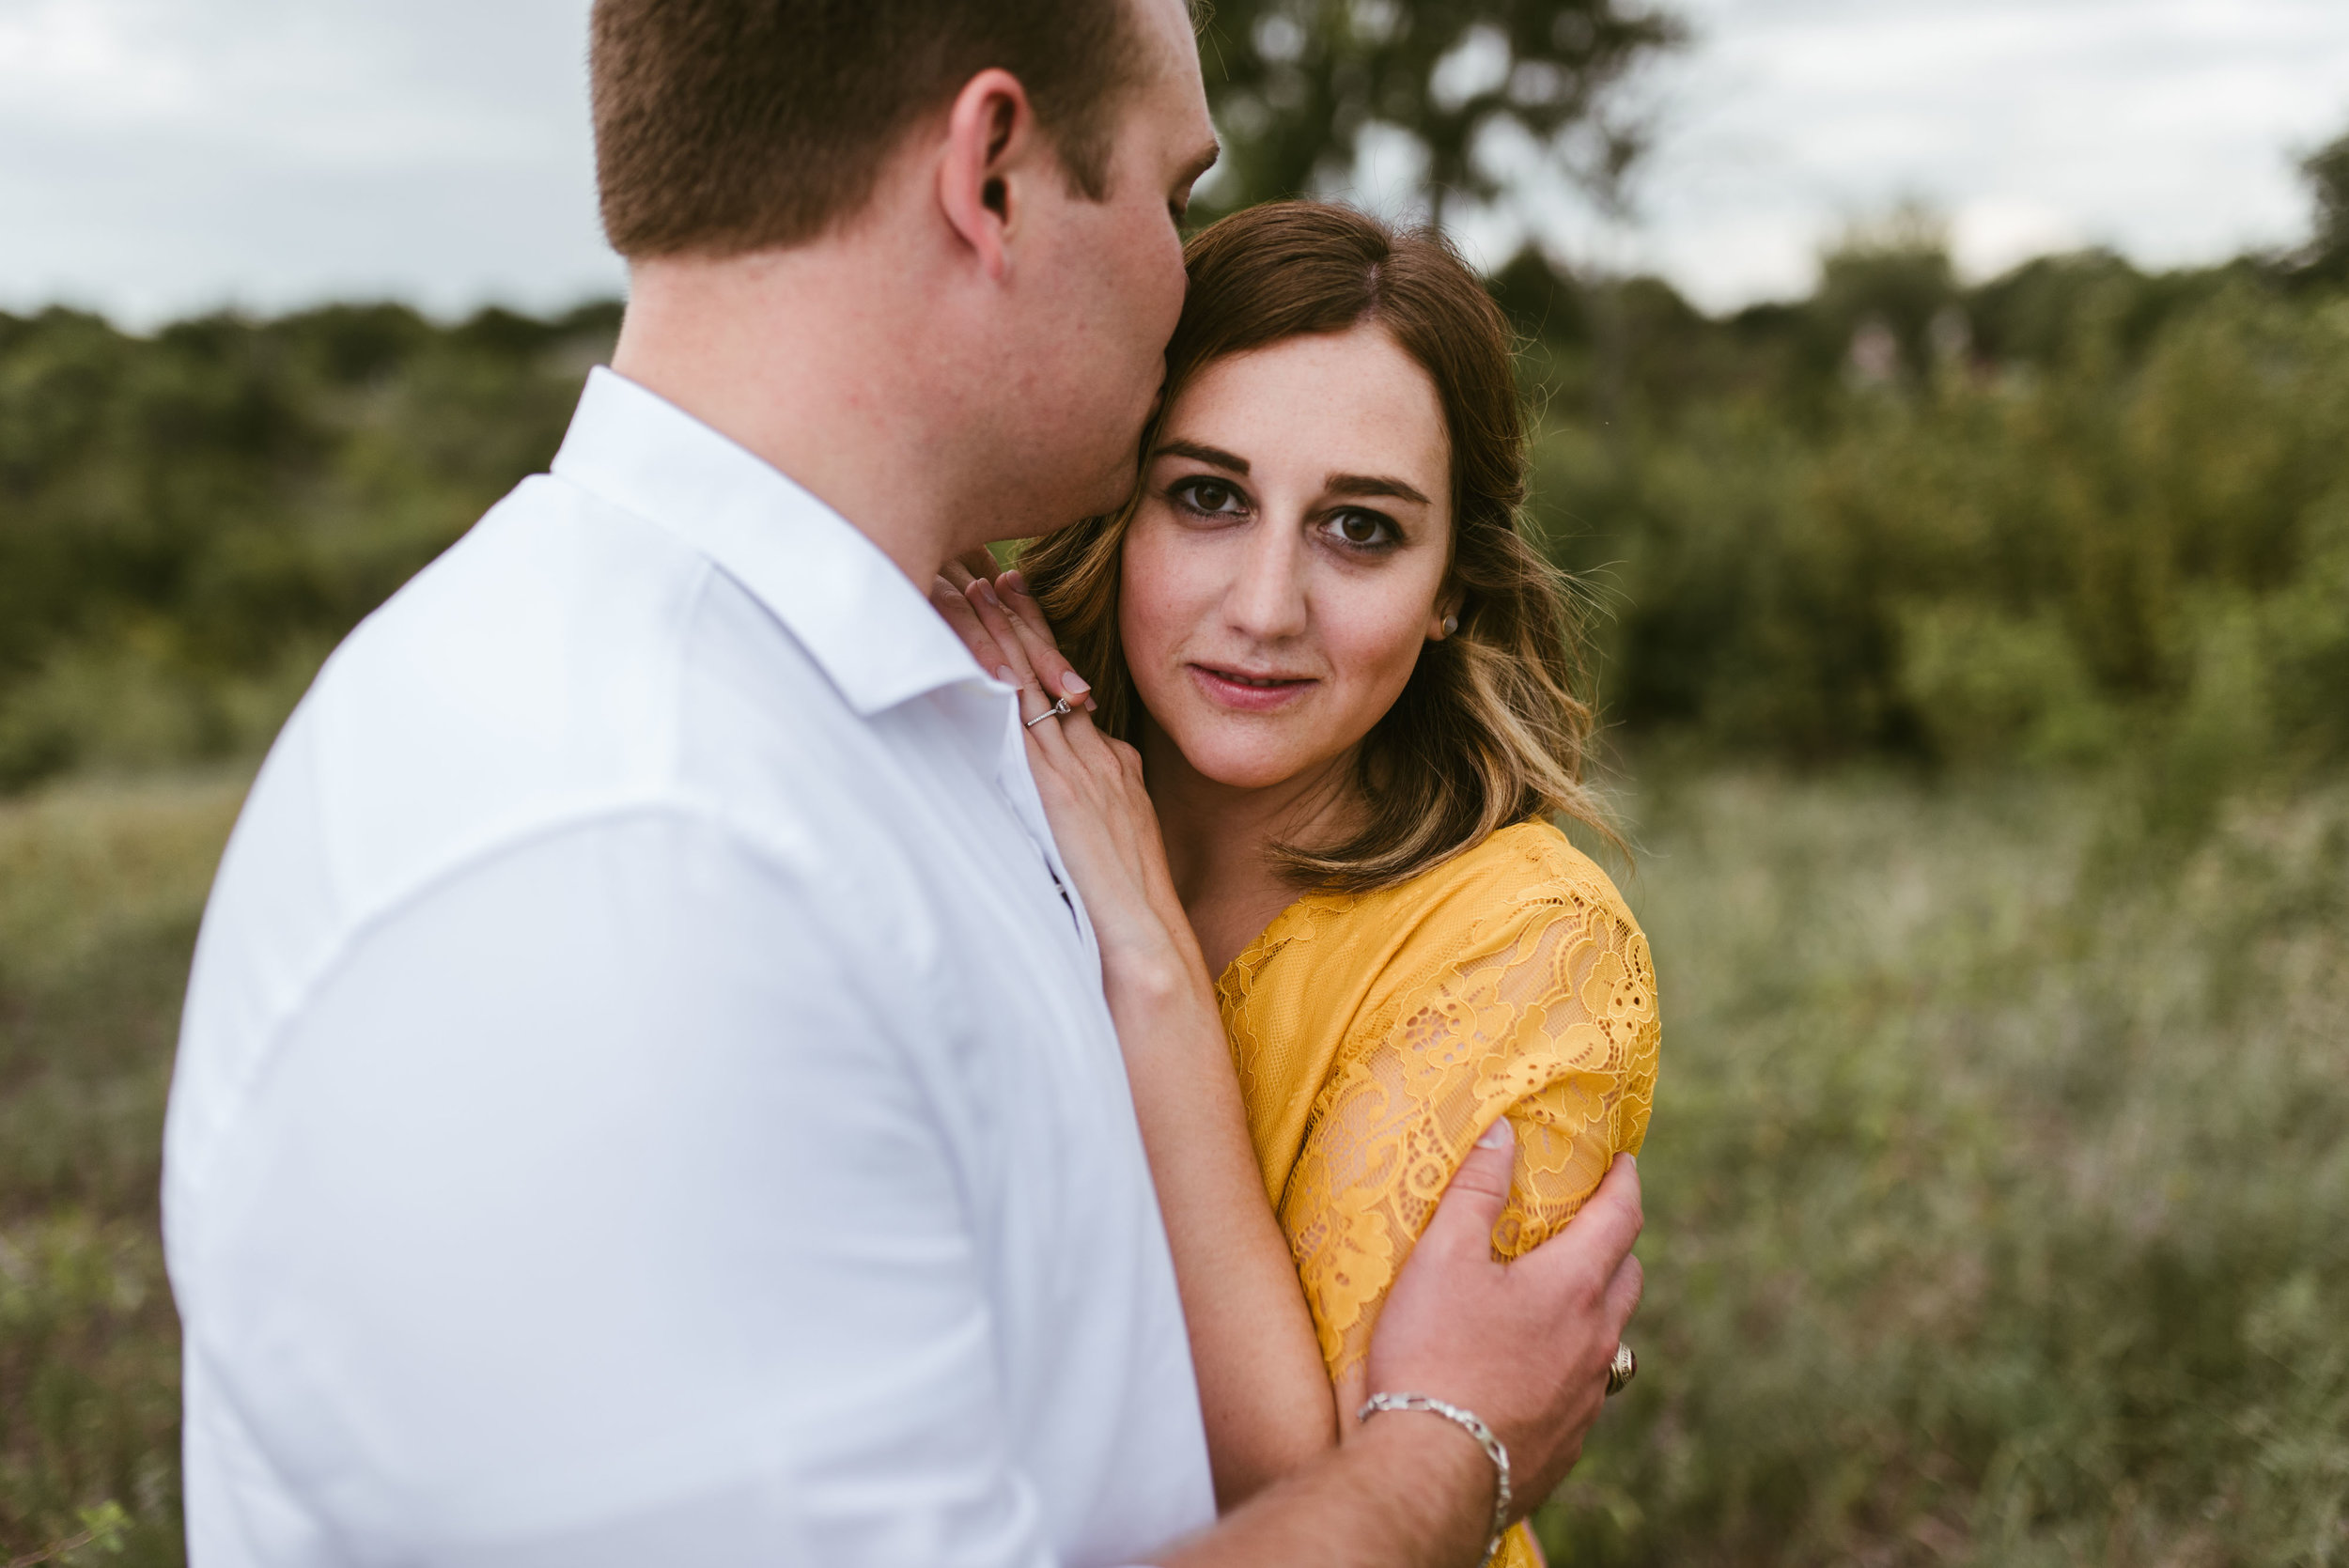  Fort Worth Engagement Session | Laura+Tyler | Fort Worth Engagement Photographer | www.jordanmitchellphotography.com 